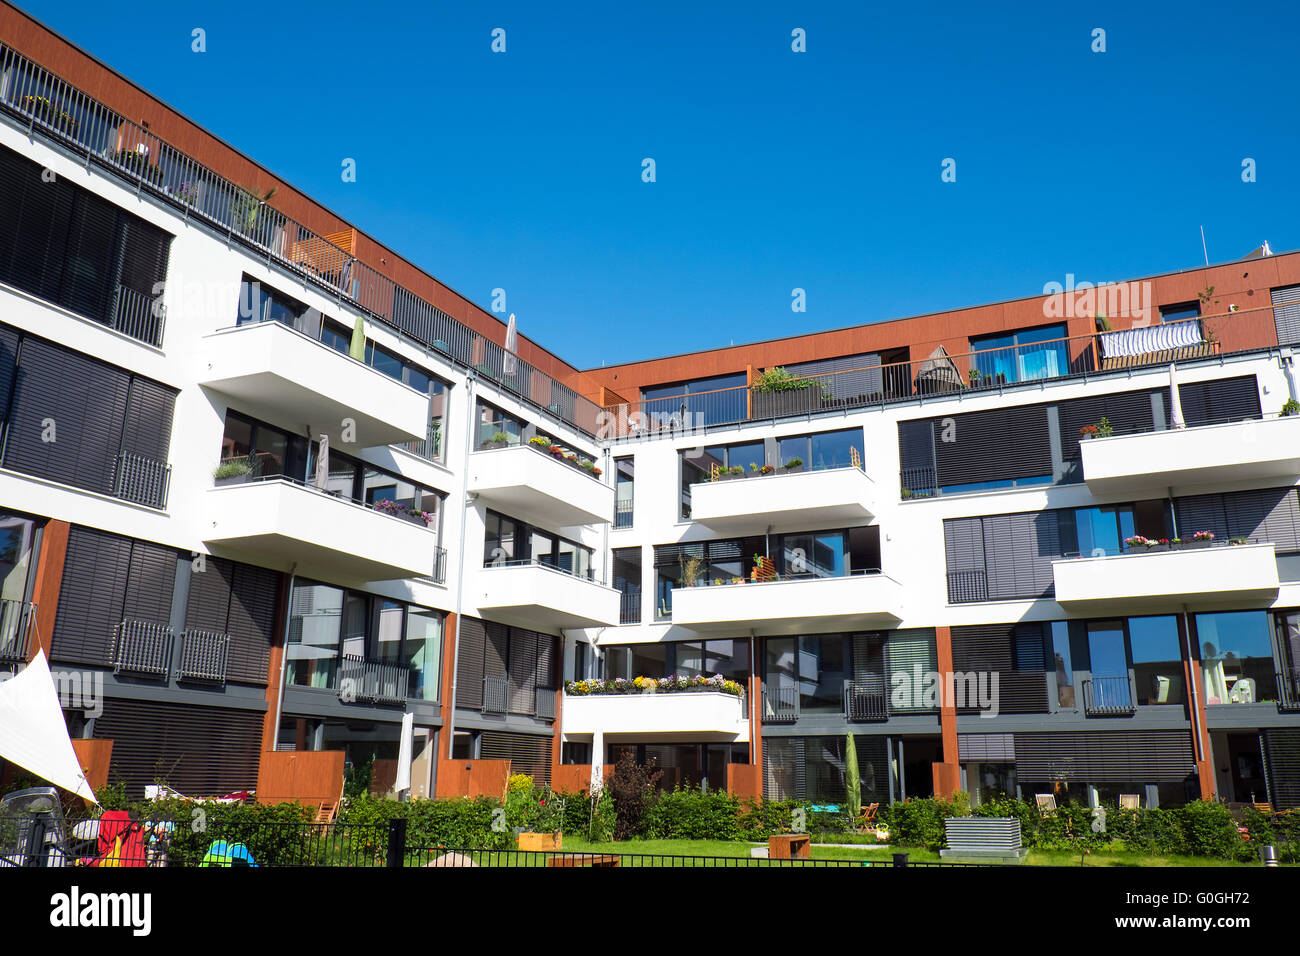 Modern apartments with garden seen in Berlin, Germany Stock Photo